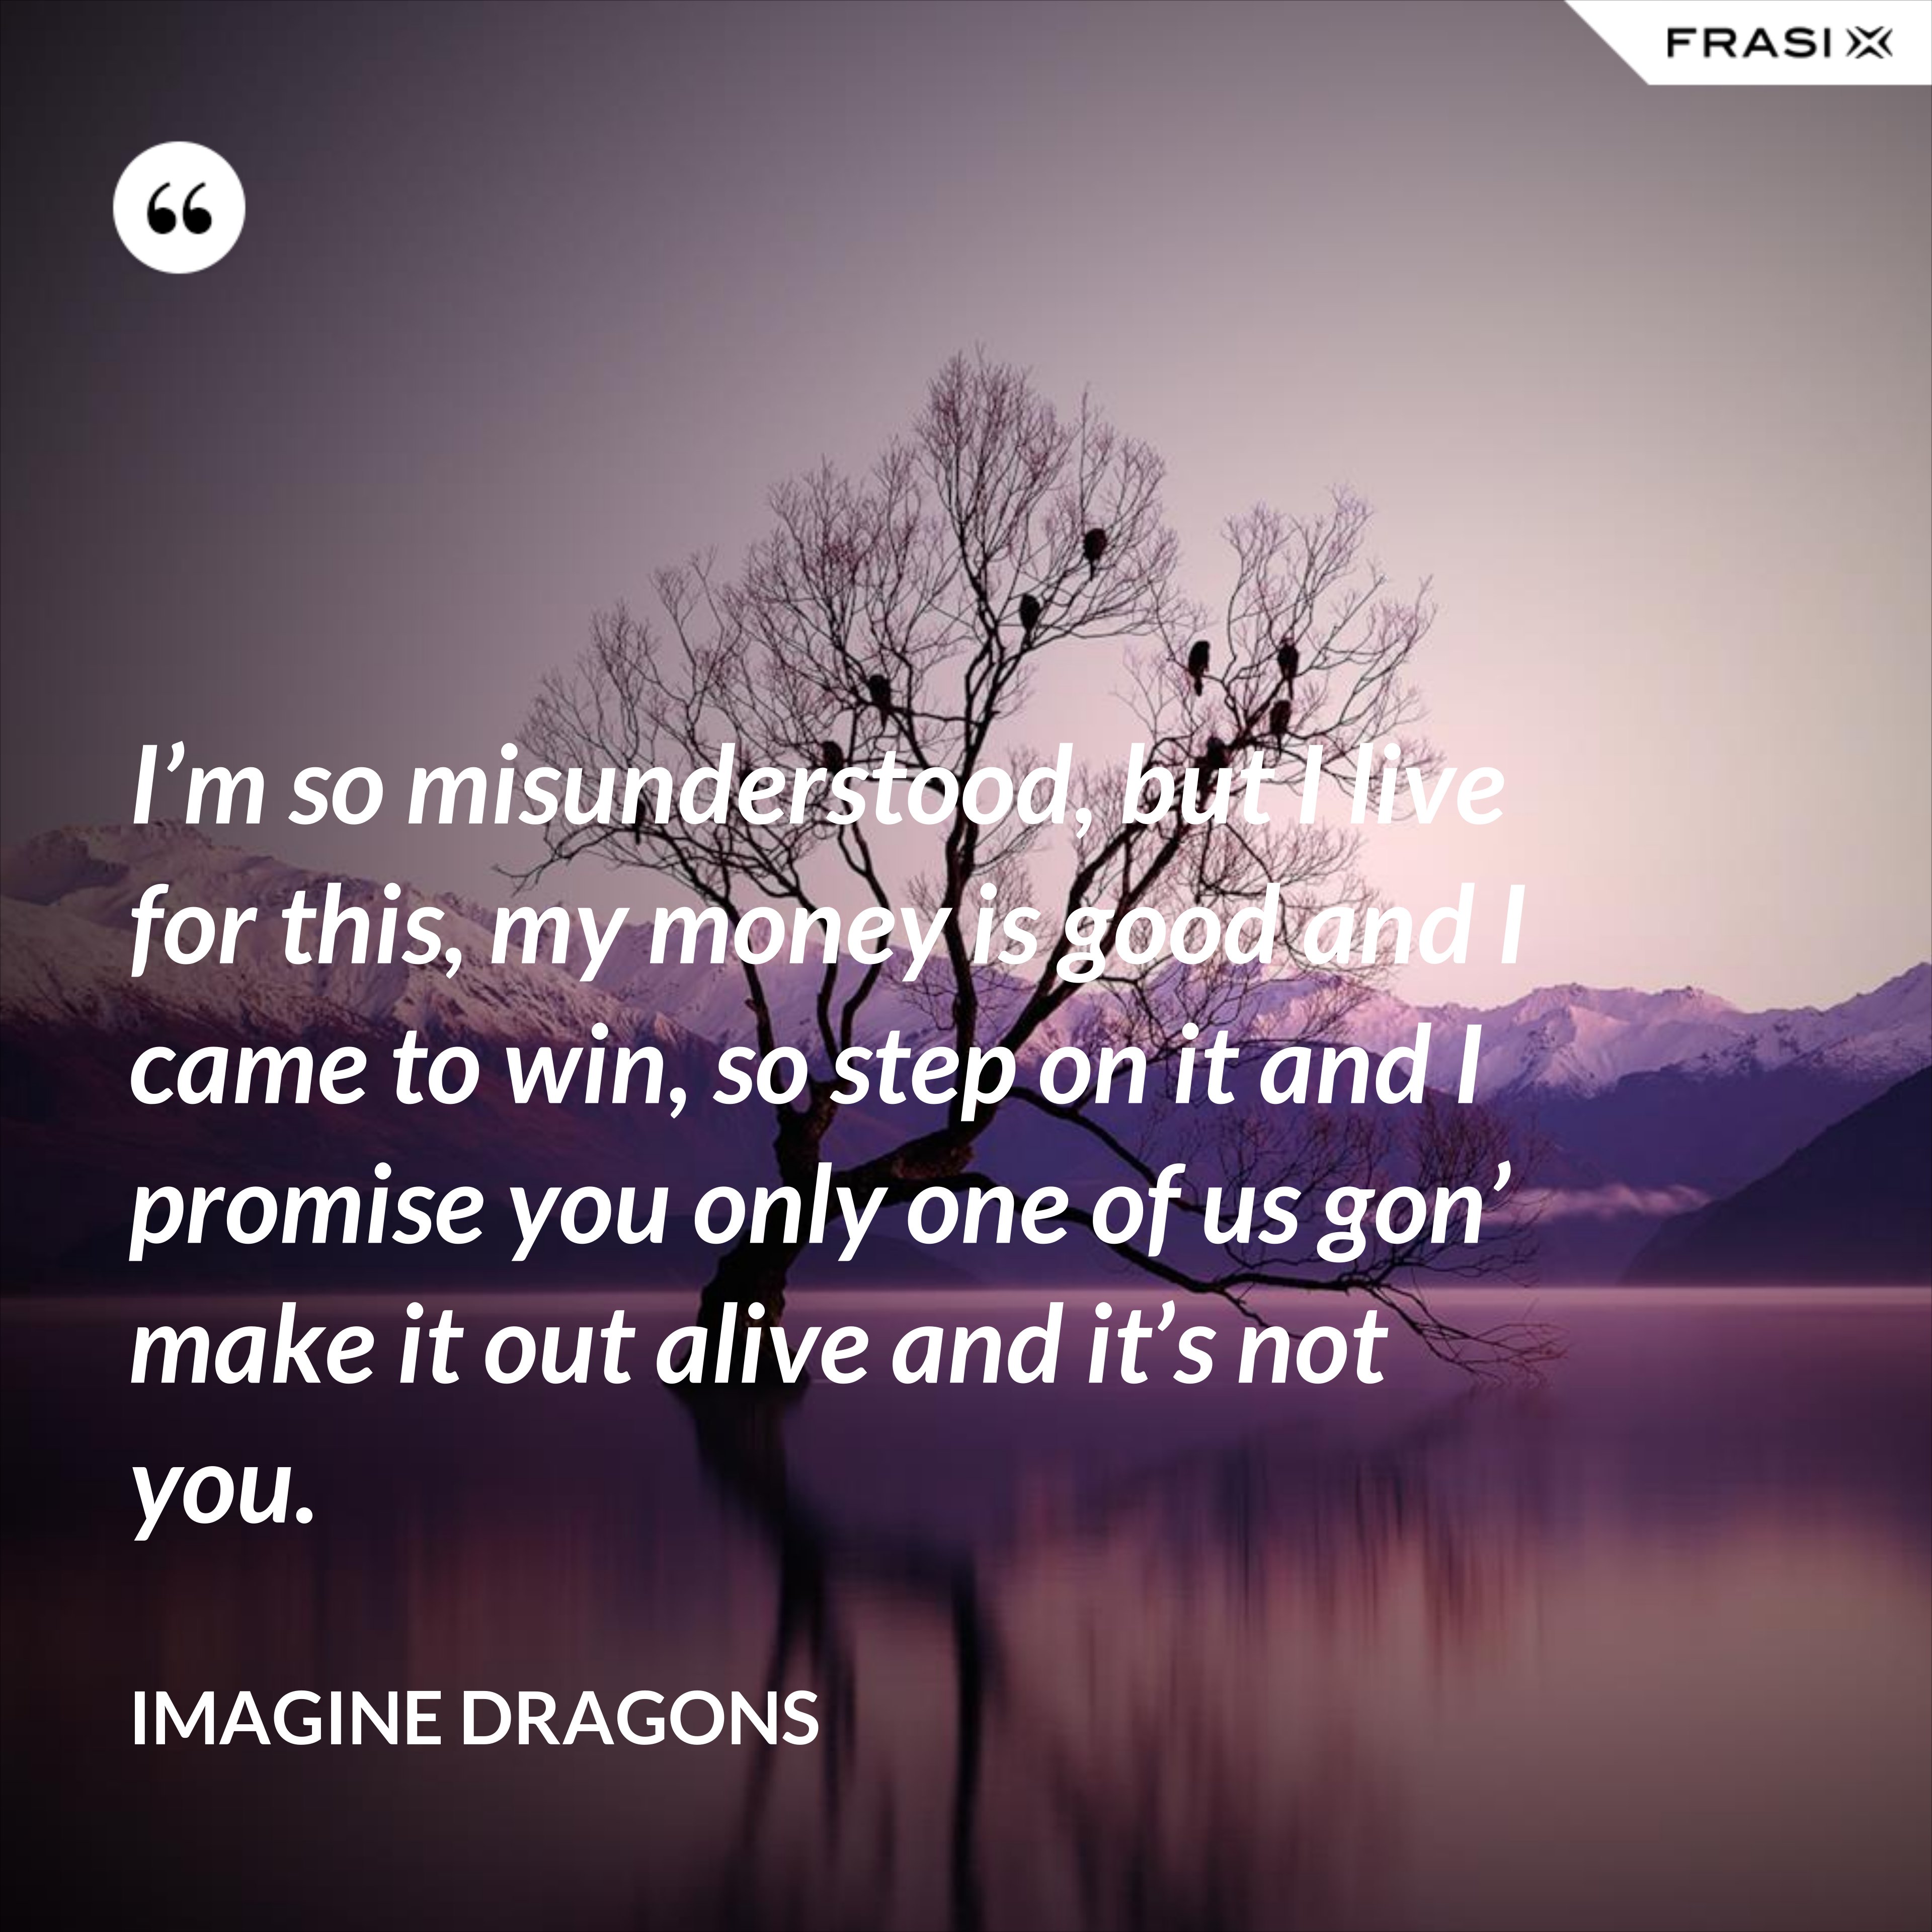 I’m so misunderstood, but I live for this, my money is good and I came to win, so step on it and I promise you only one of us gon’ make it out alive and it’s not you. - Imagine Dragons